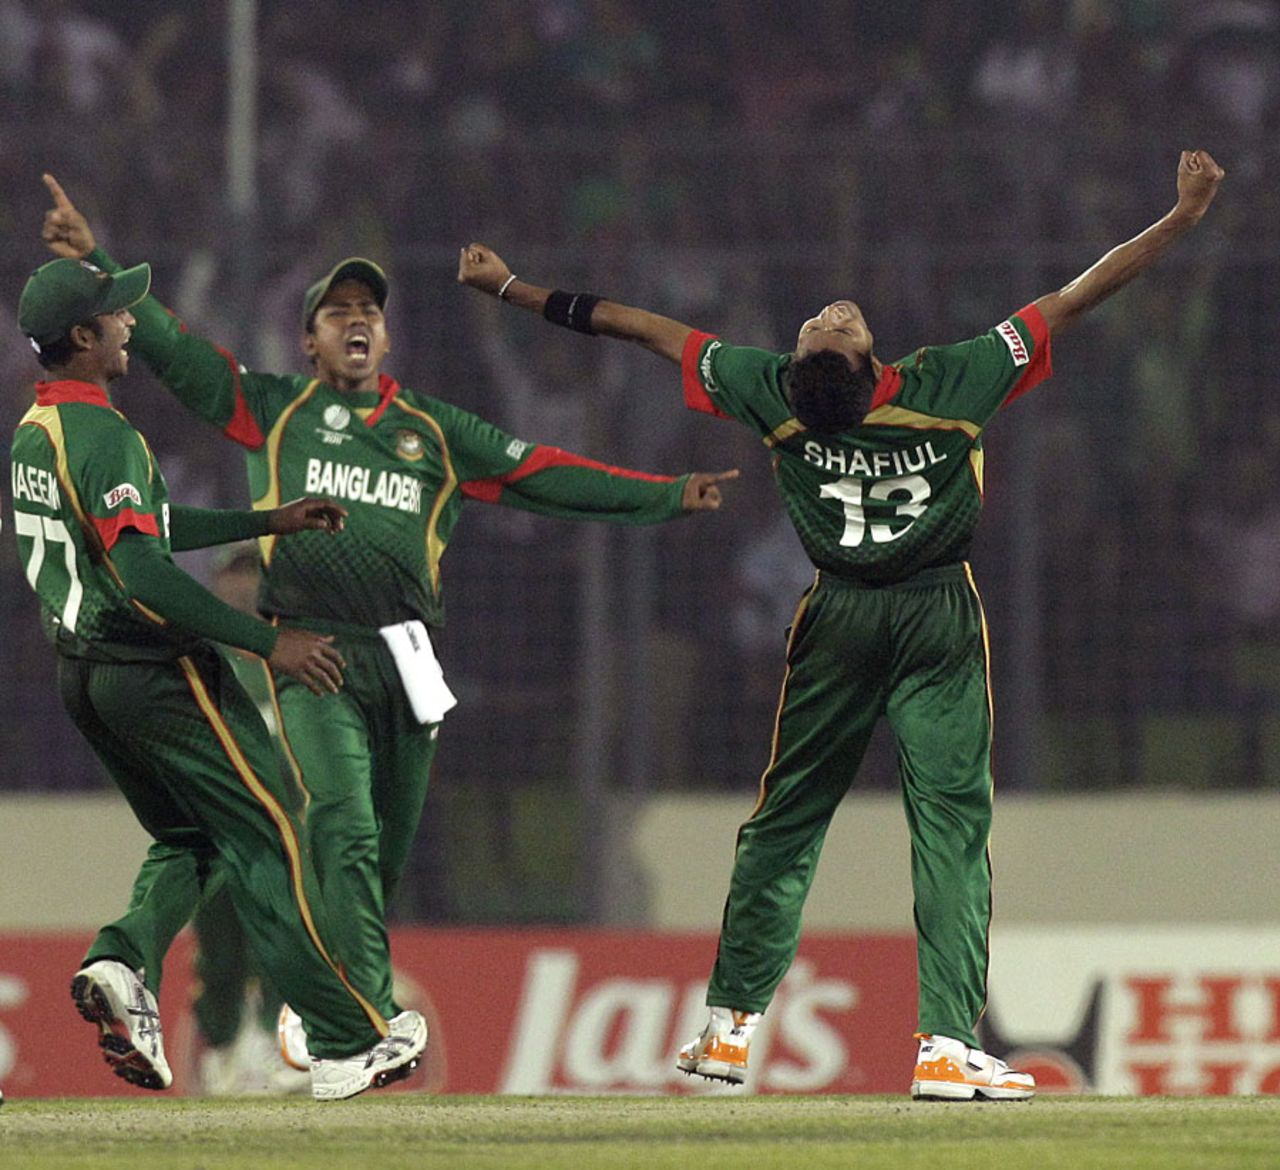 Shafiul Islam was Bangladesh's hero at the end with four wickets, Bangladesh v Ireland, World Cup 2011, Mirpur, February 25, 2010
